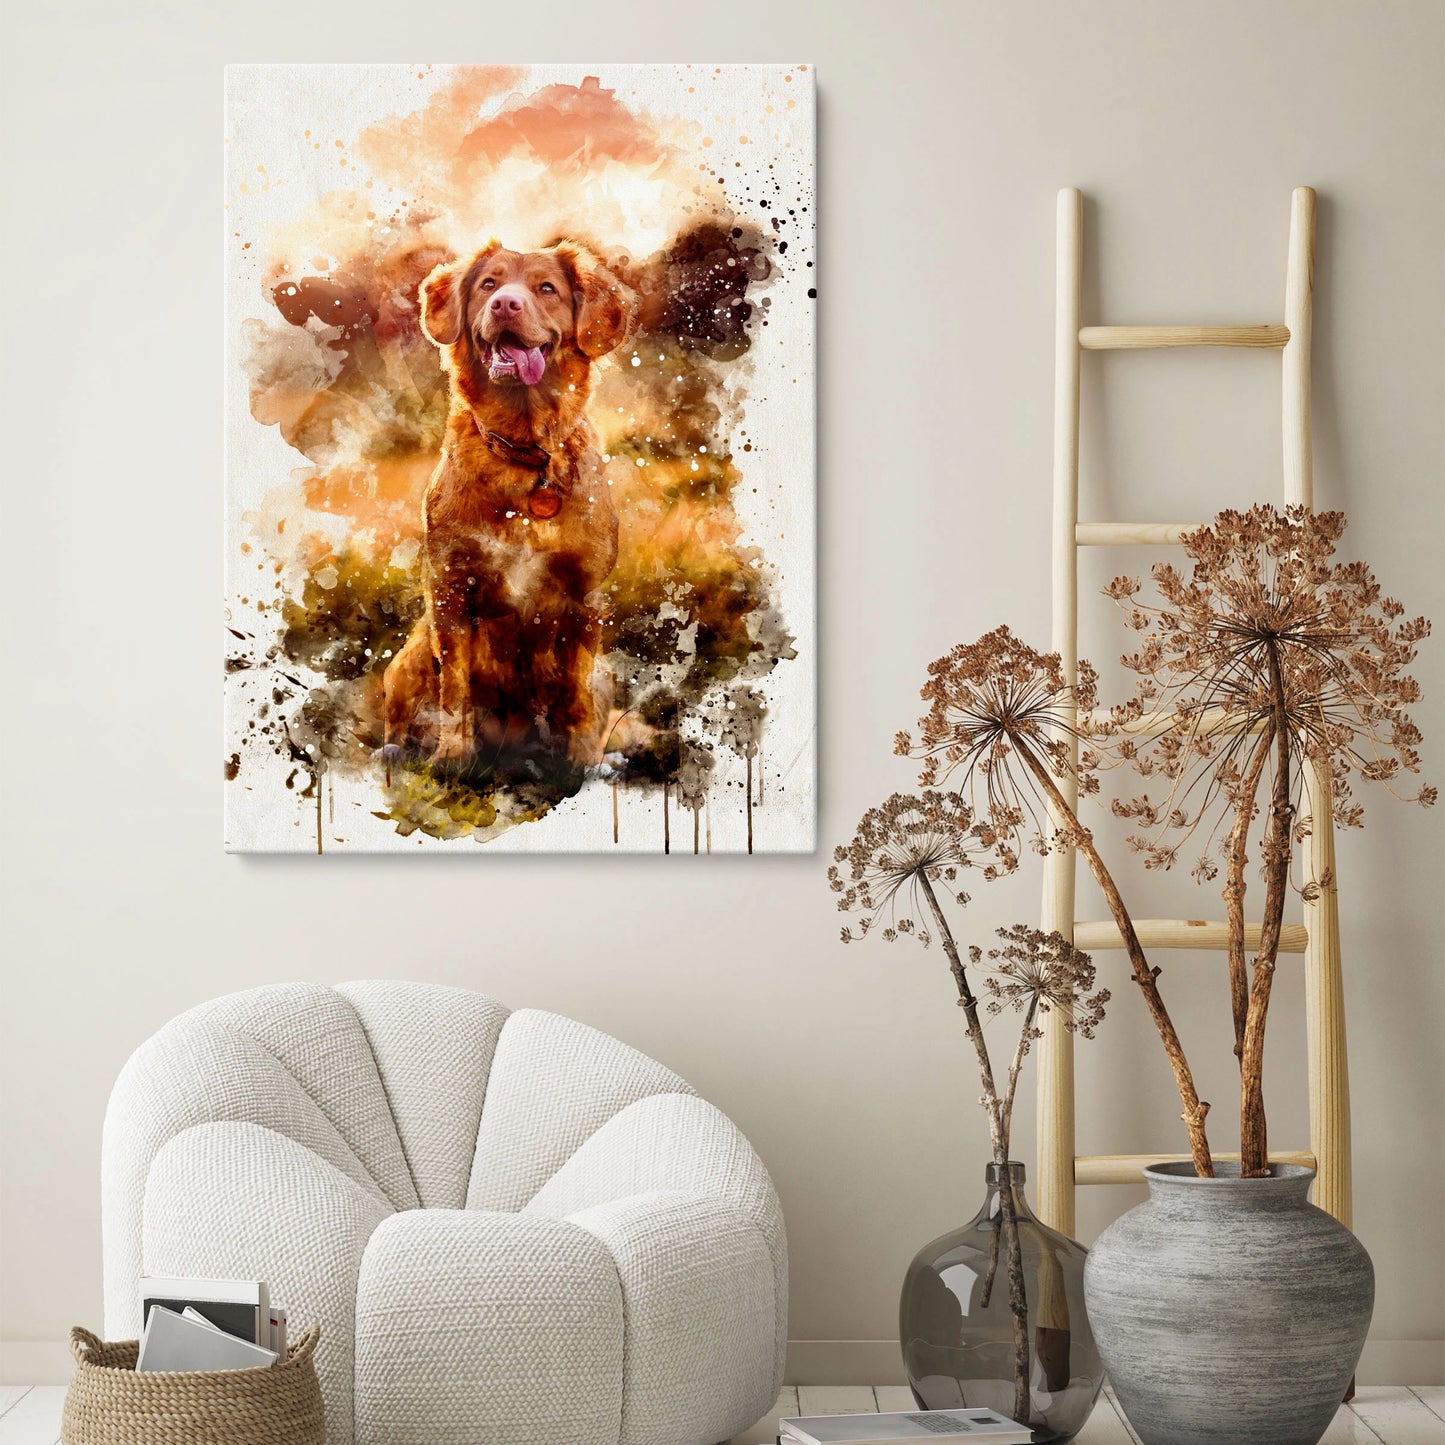 Custom Watercolor Dog Portrait from Photo